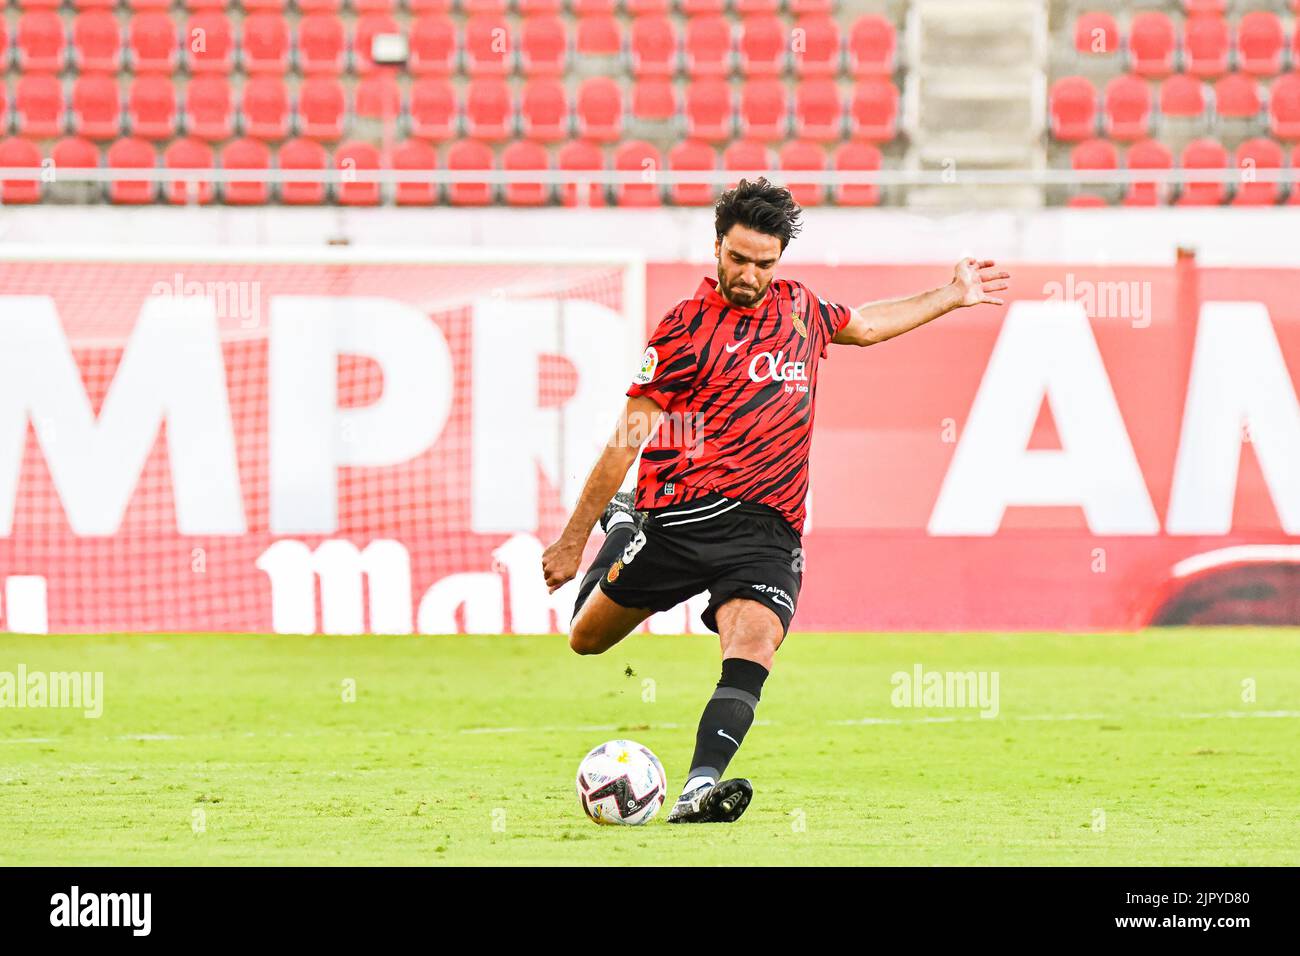 MALLORCA, SPAIN - AUGUST 20: Clement Grenier of RCD Mallorca during in the match between RCD Mallorca and Real Betis of La Liga Santander on August 20, 2022 at Visit Mallorca Stadium Son Moix in Mallorca, Spain. (Photo by Samuel Carreño/PxImages) Stock Photo